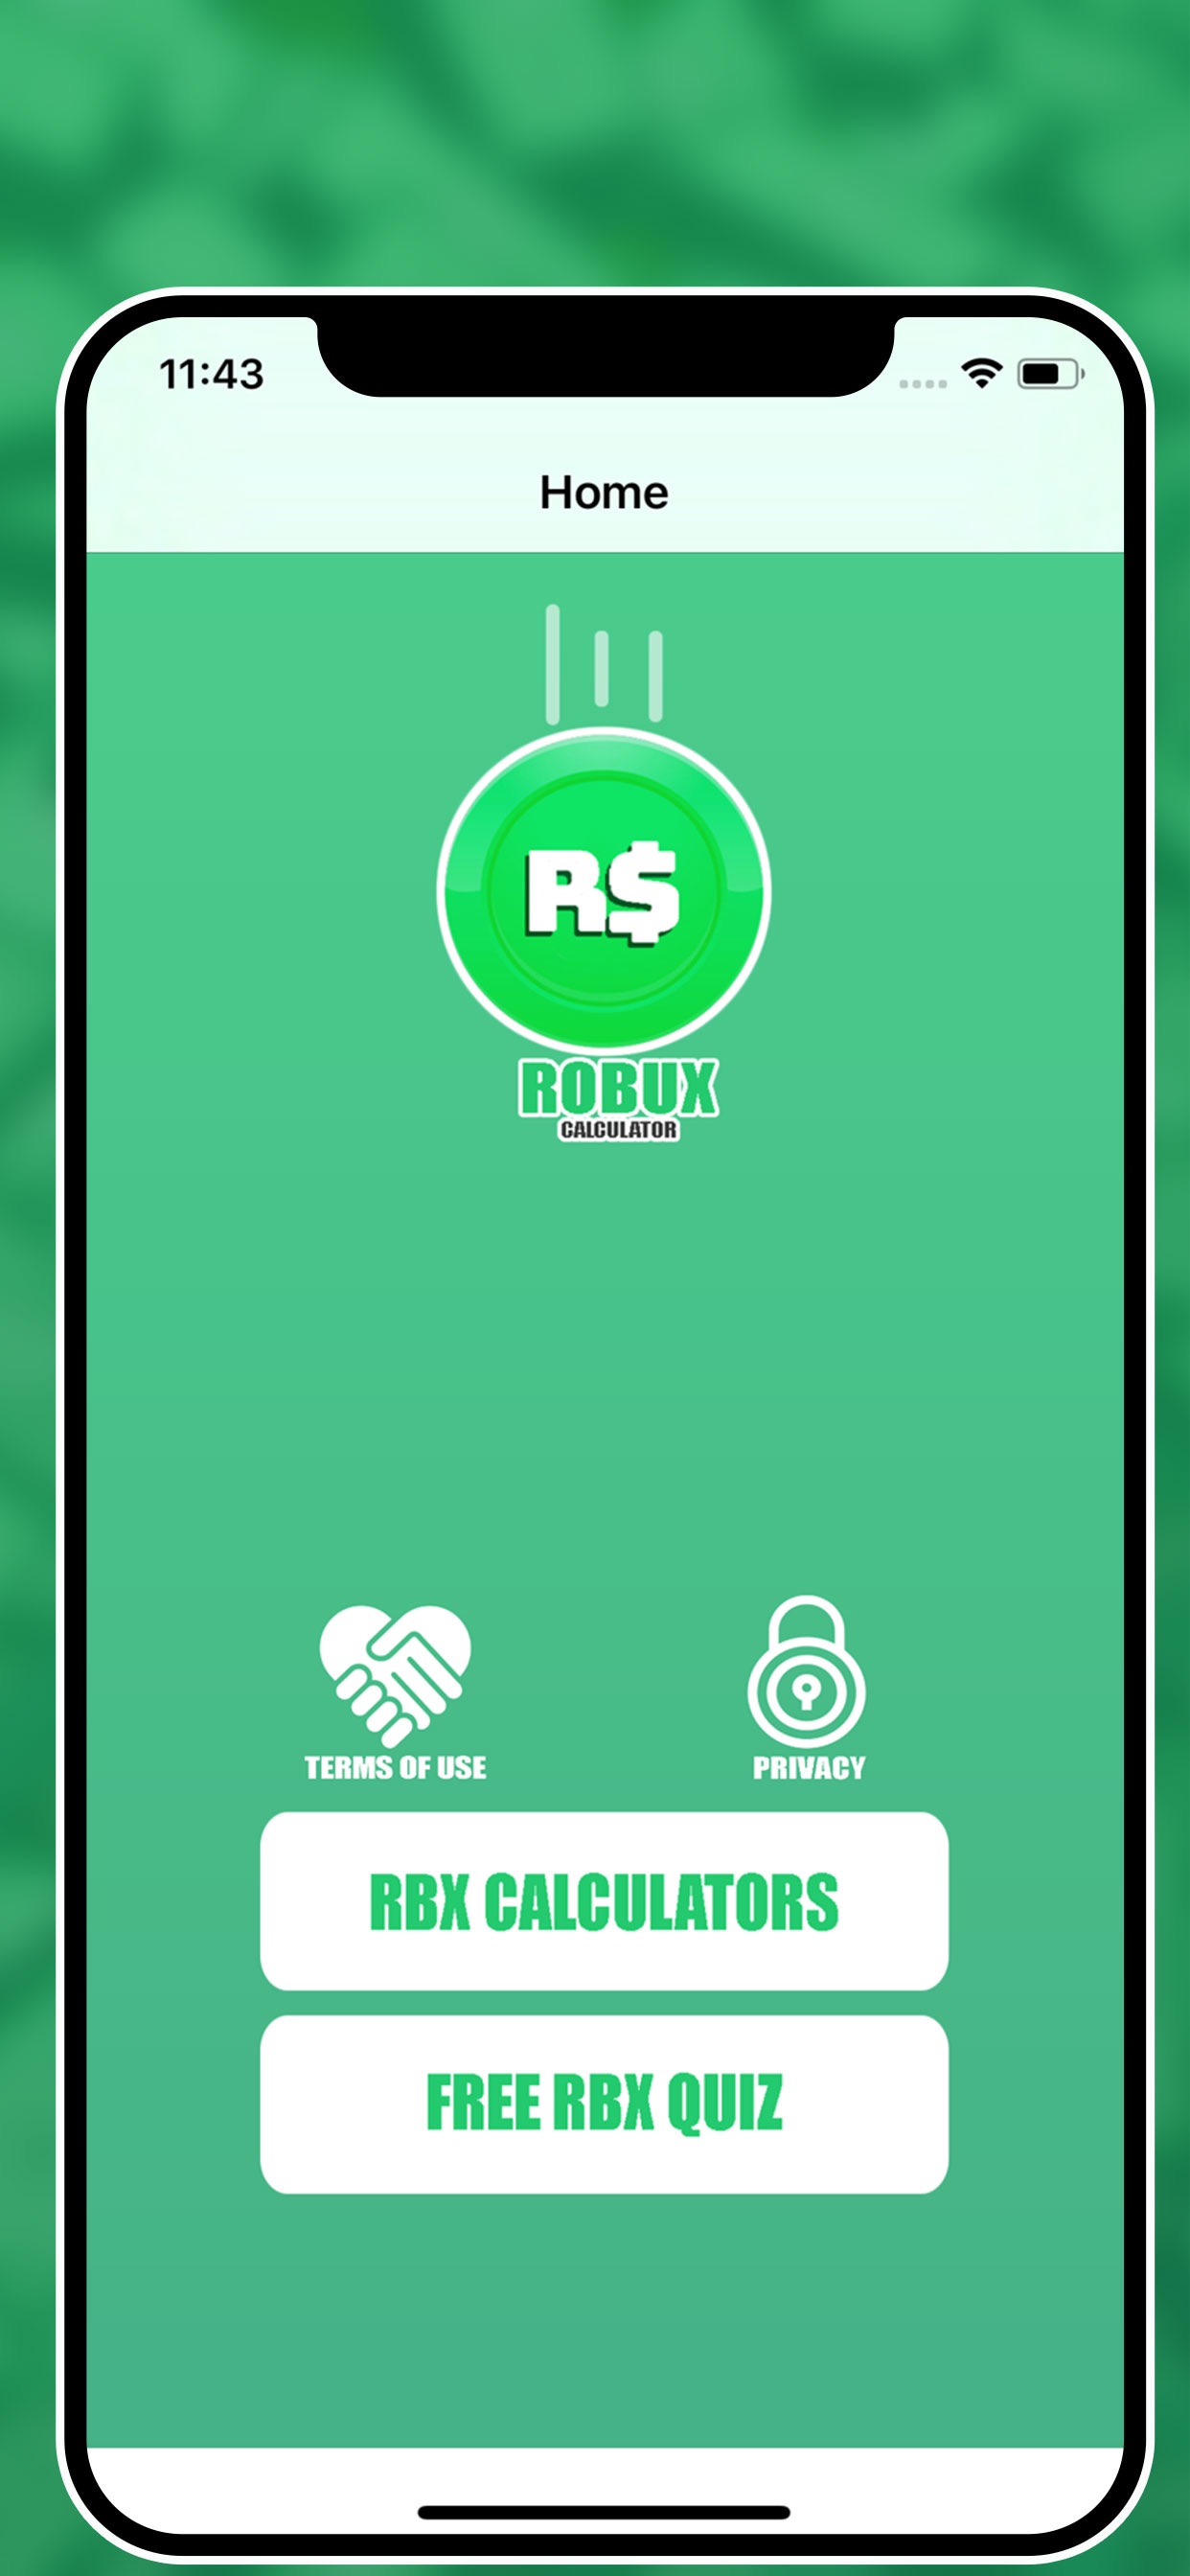 Robux Calculator For Rblox App Store Review Aso Revenue Downloads Appfollow - quiz for robux app store review aso revenue